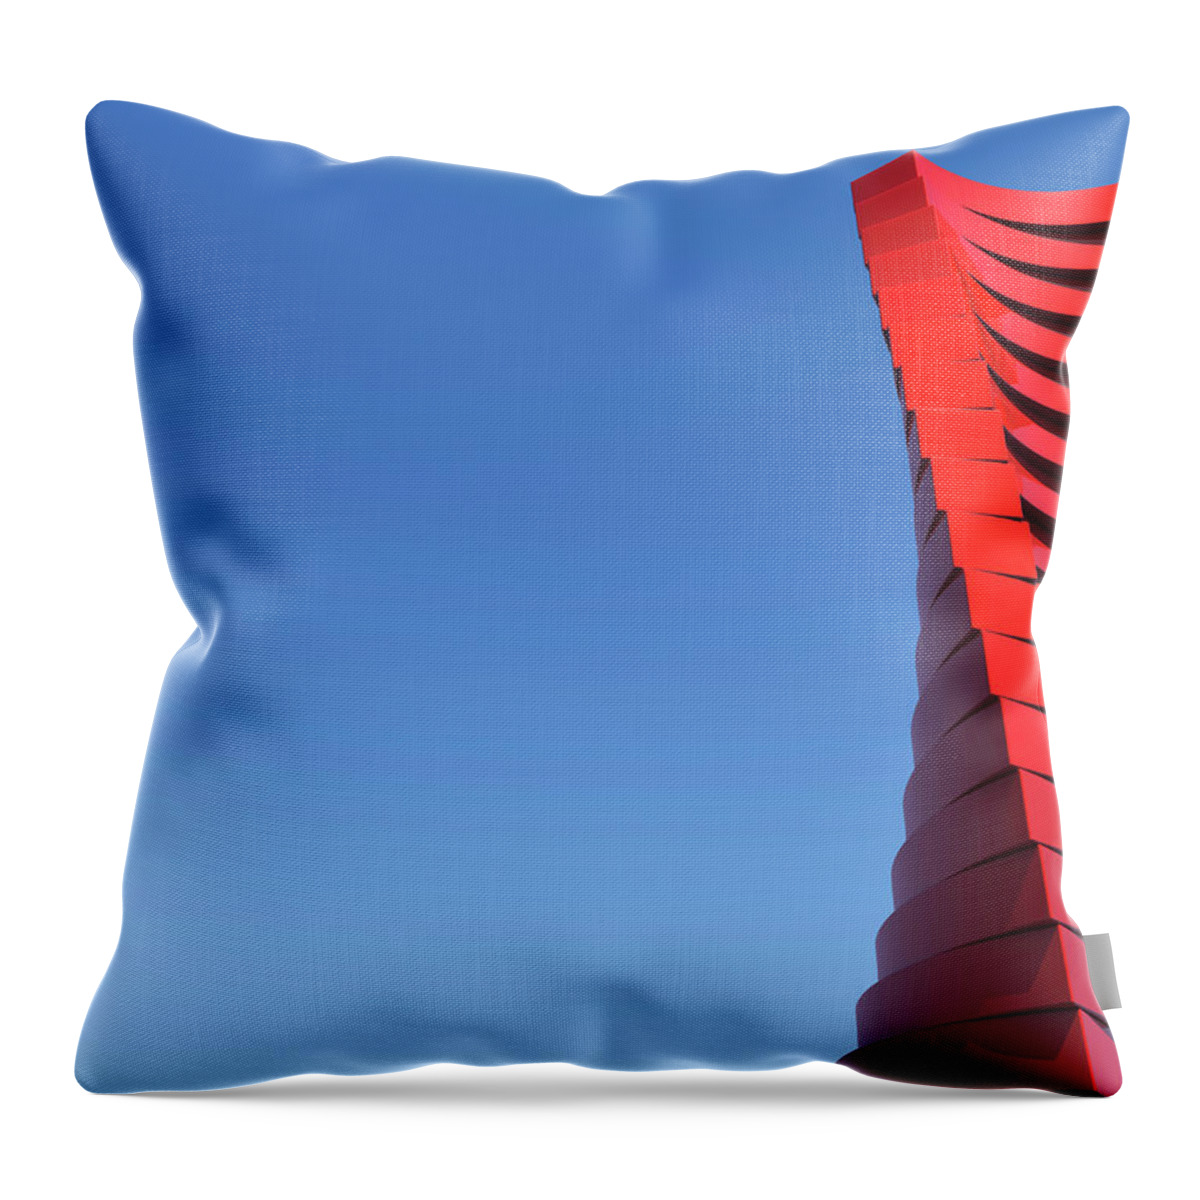 Built Structure Throw Pillow featuring the photograph Modern Helical Architectural Building by Raycat